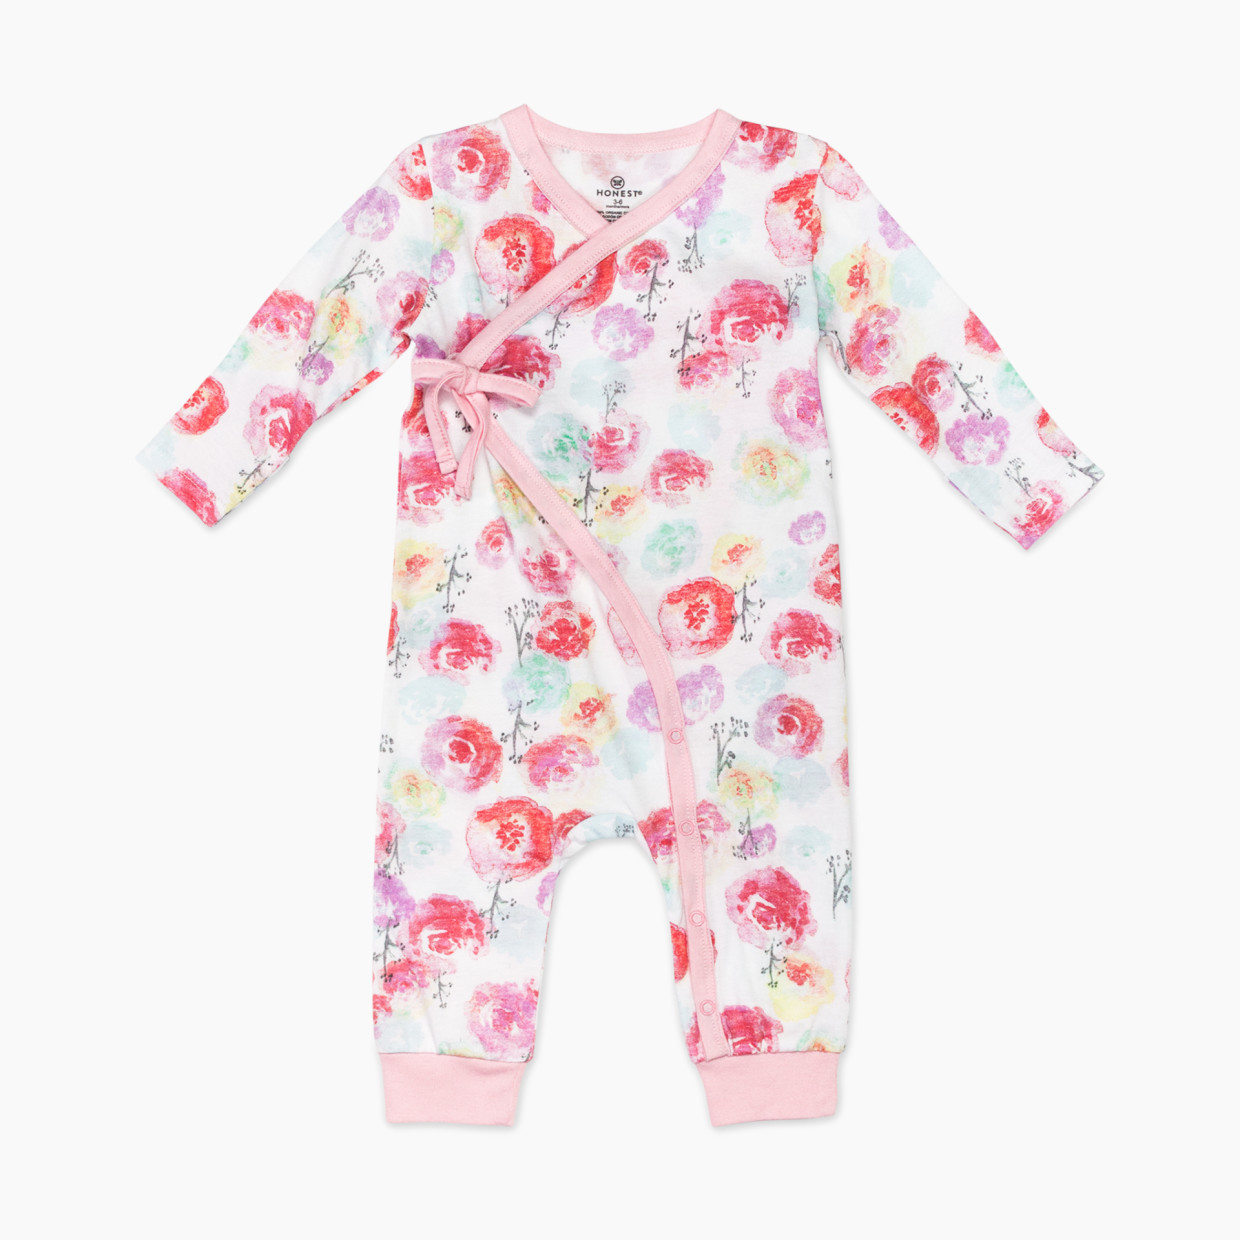 Honest Baby Clothing Organic Cotton Side Tie Coverall - Rose Blossom, Nb.